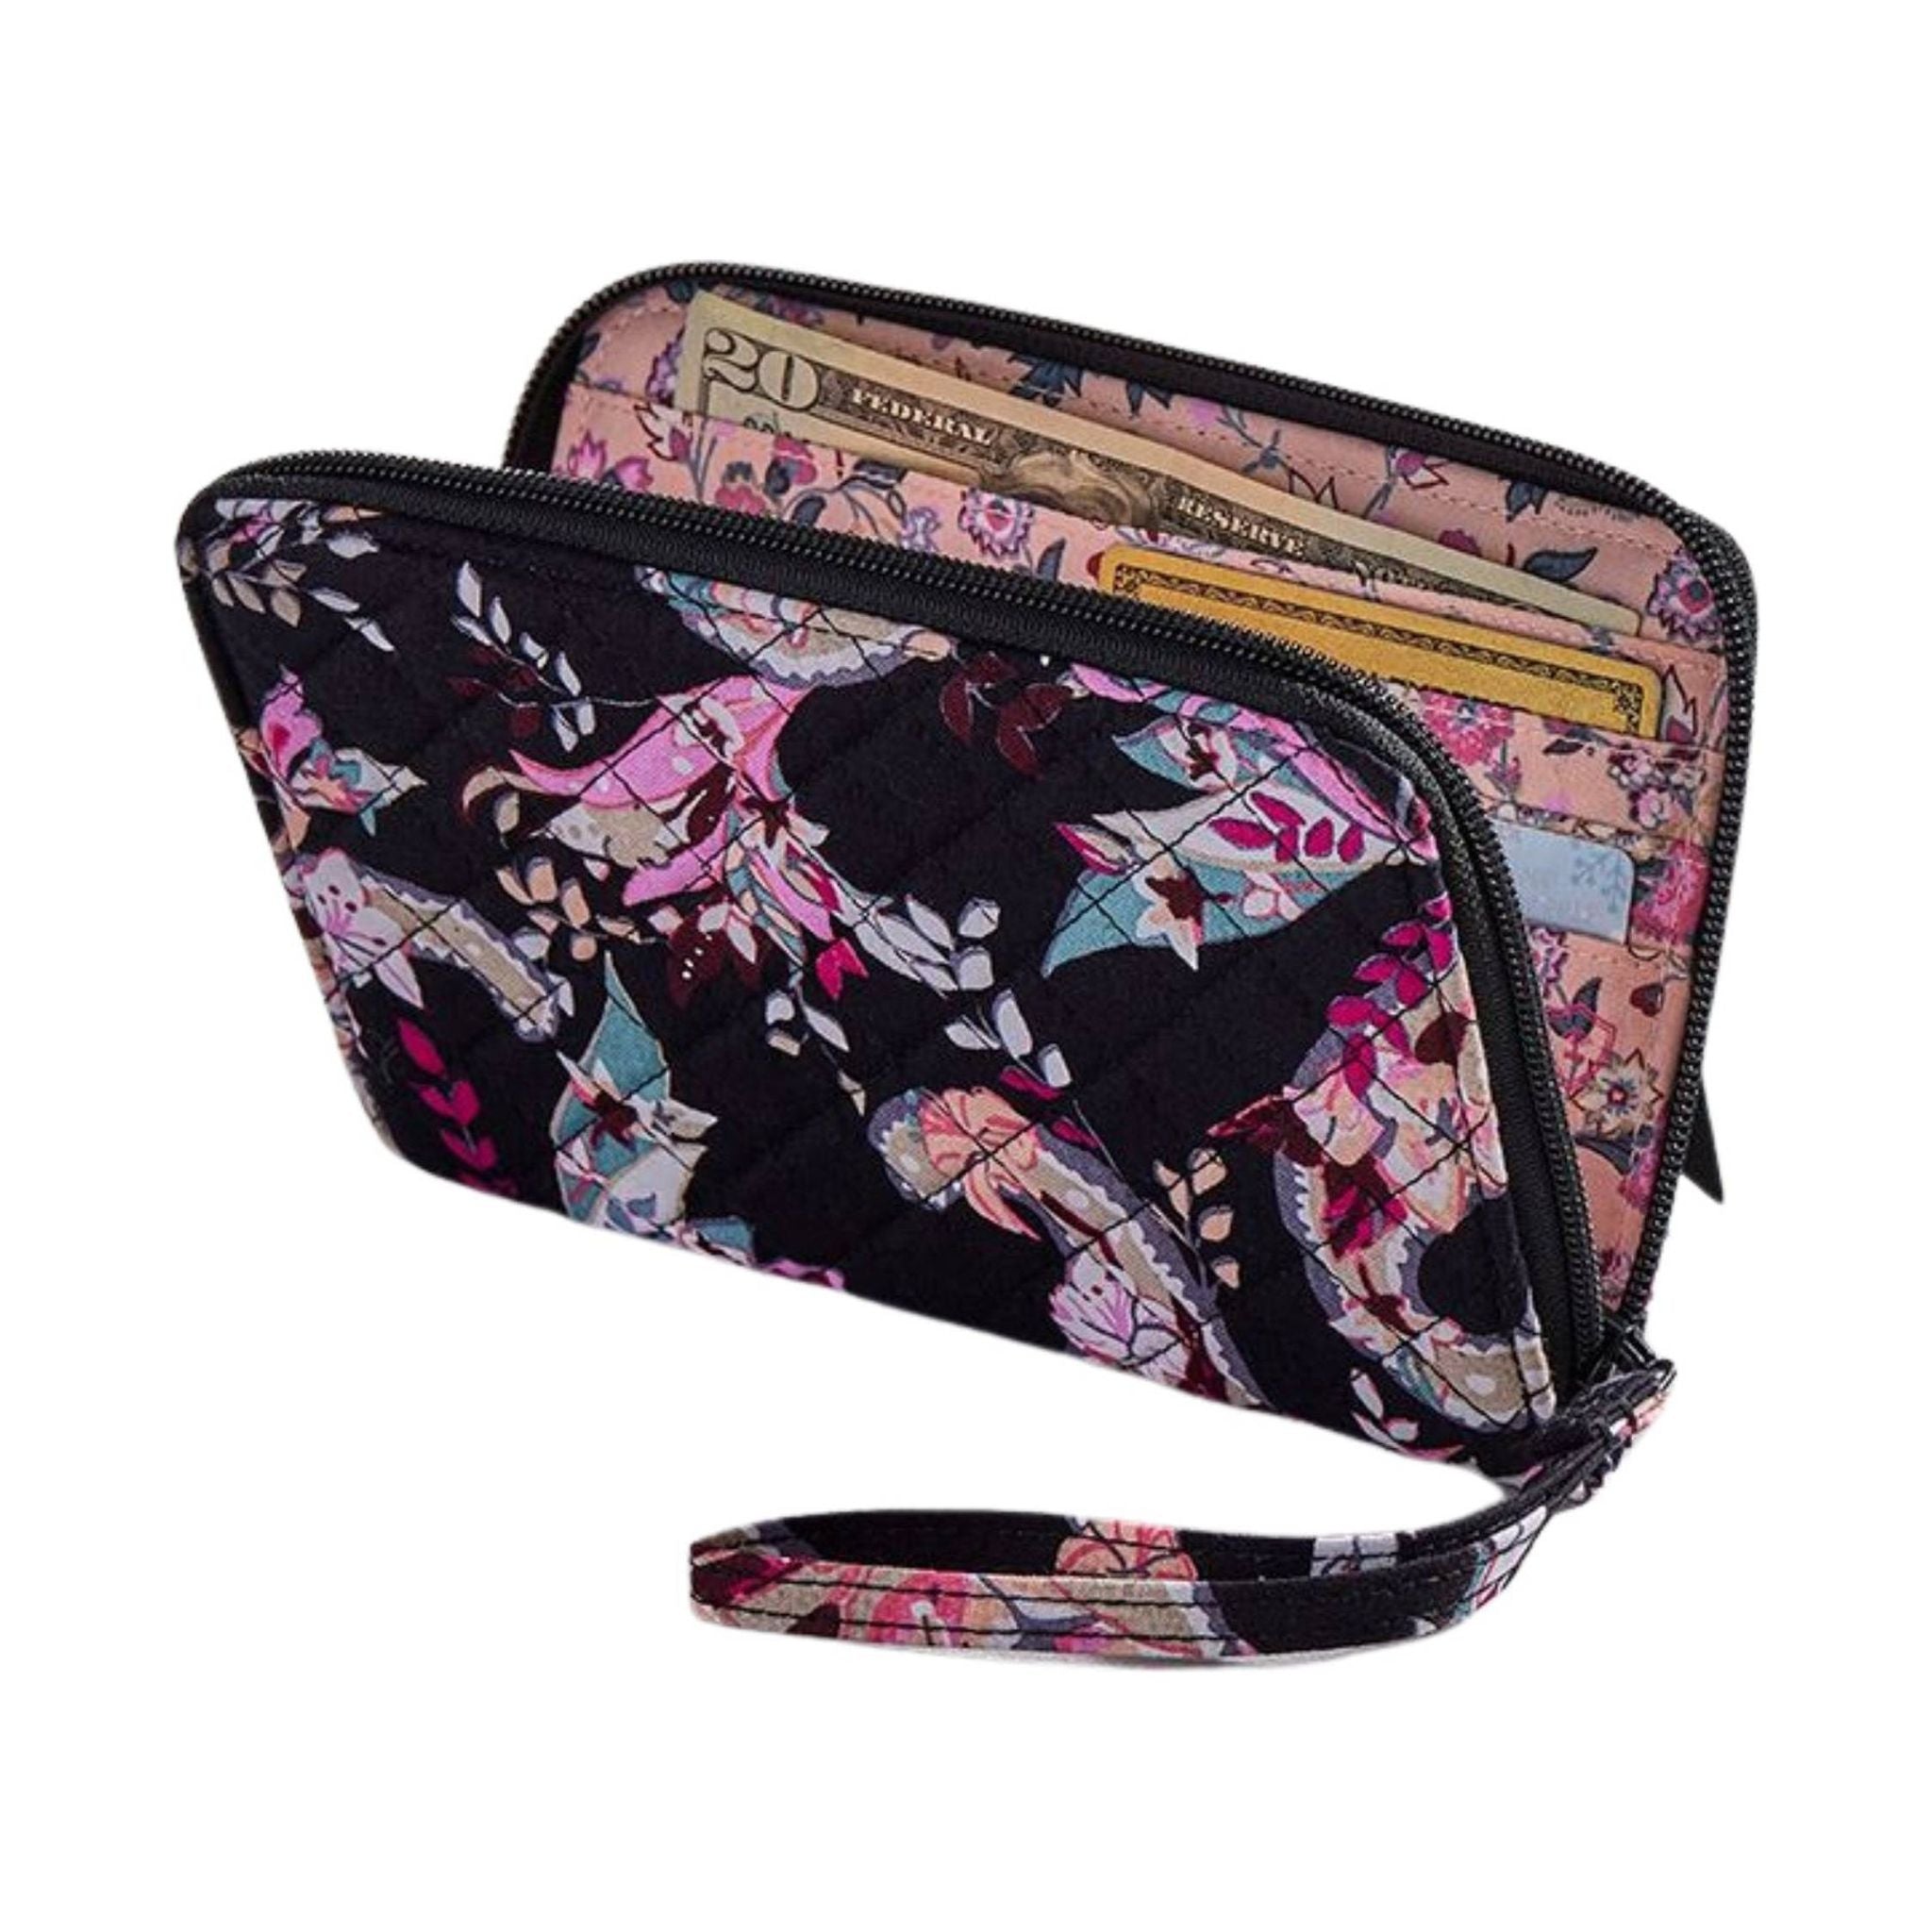 Vera Bradley Coin Purse in Soft Sky Paisley | The Paper Store